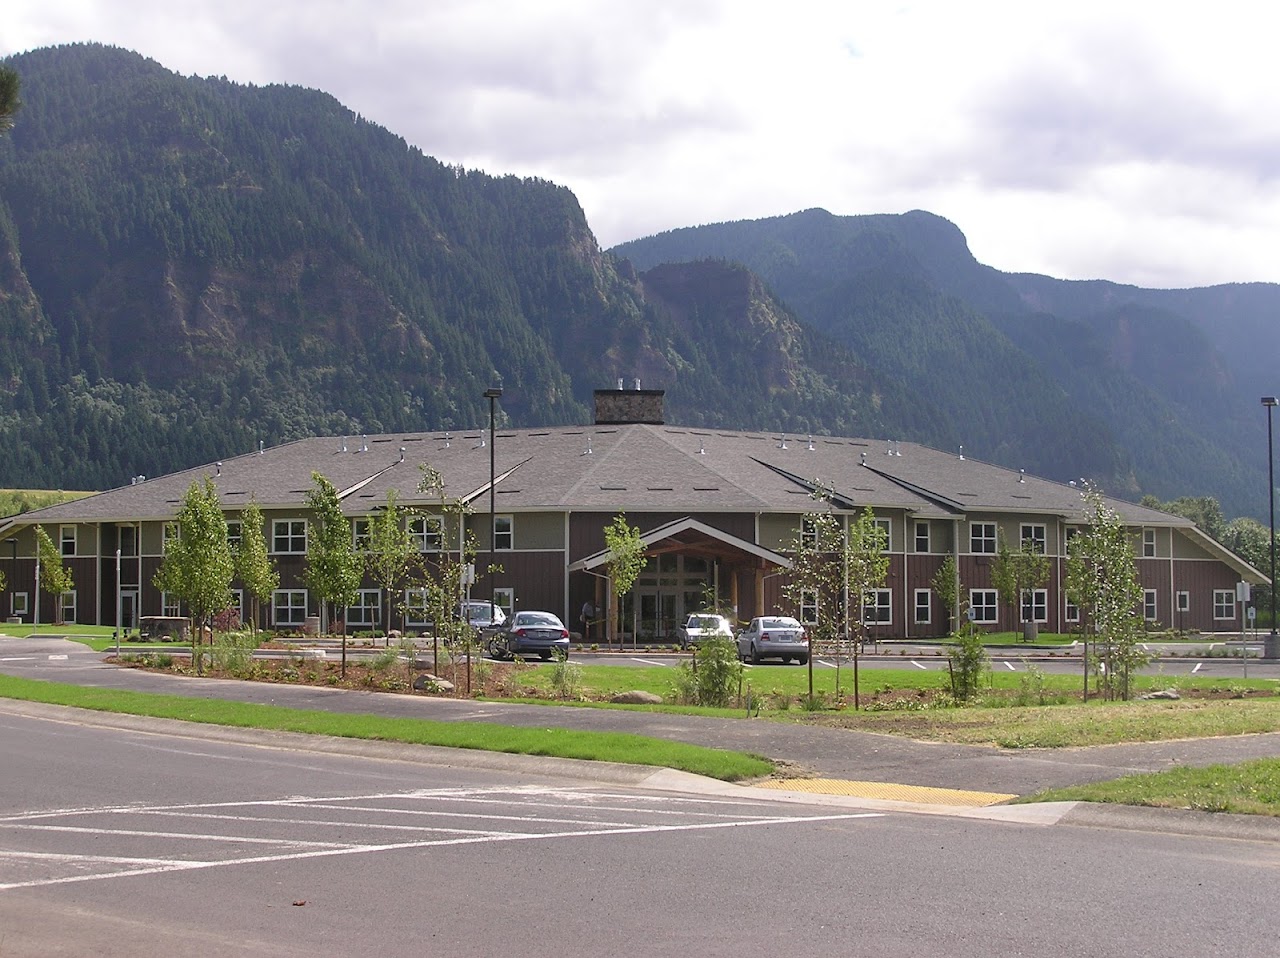 Photo of HAMILTON PARK. Affordable housing located at 30 PORTAGE DR NORTH BONNEVILLE, WA 98639